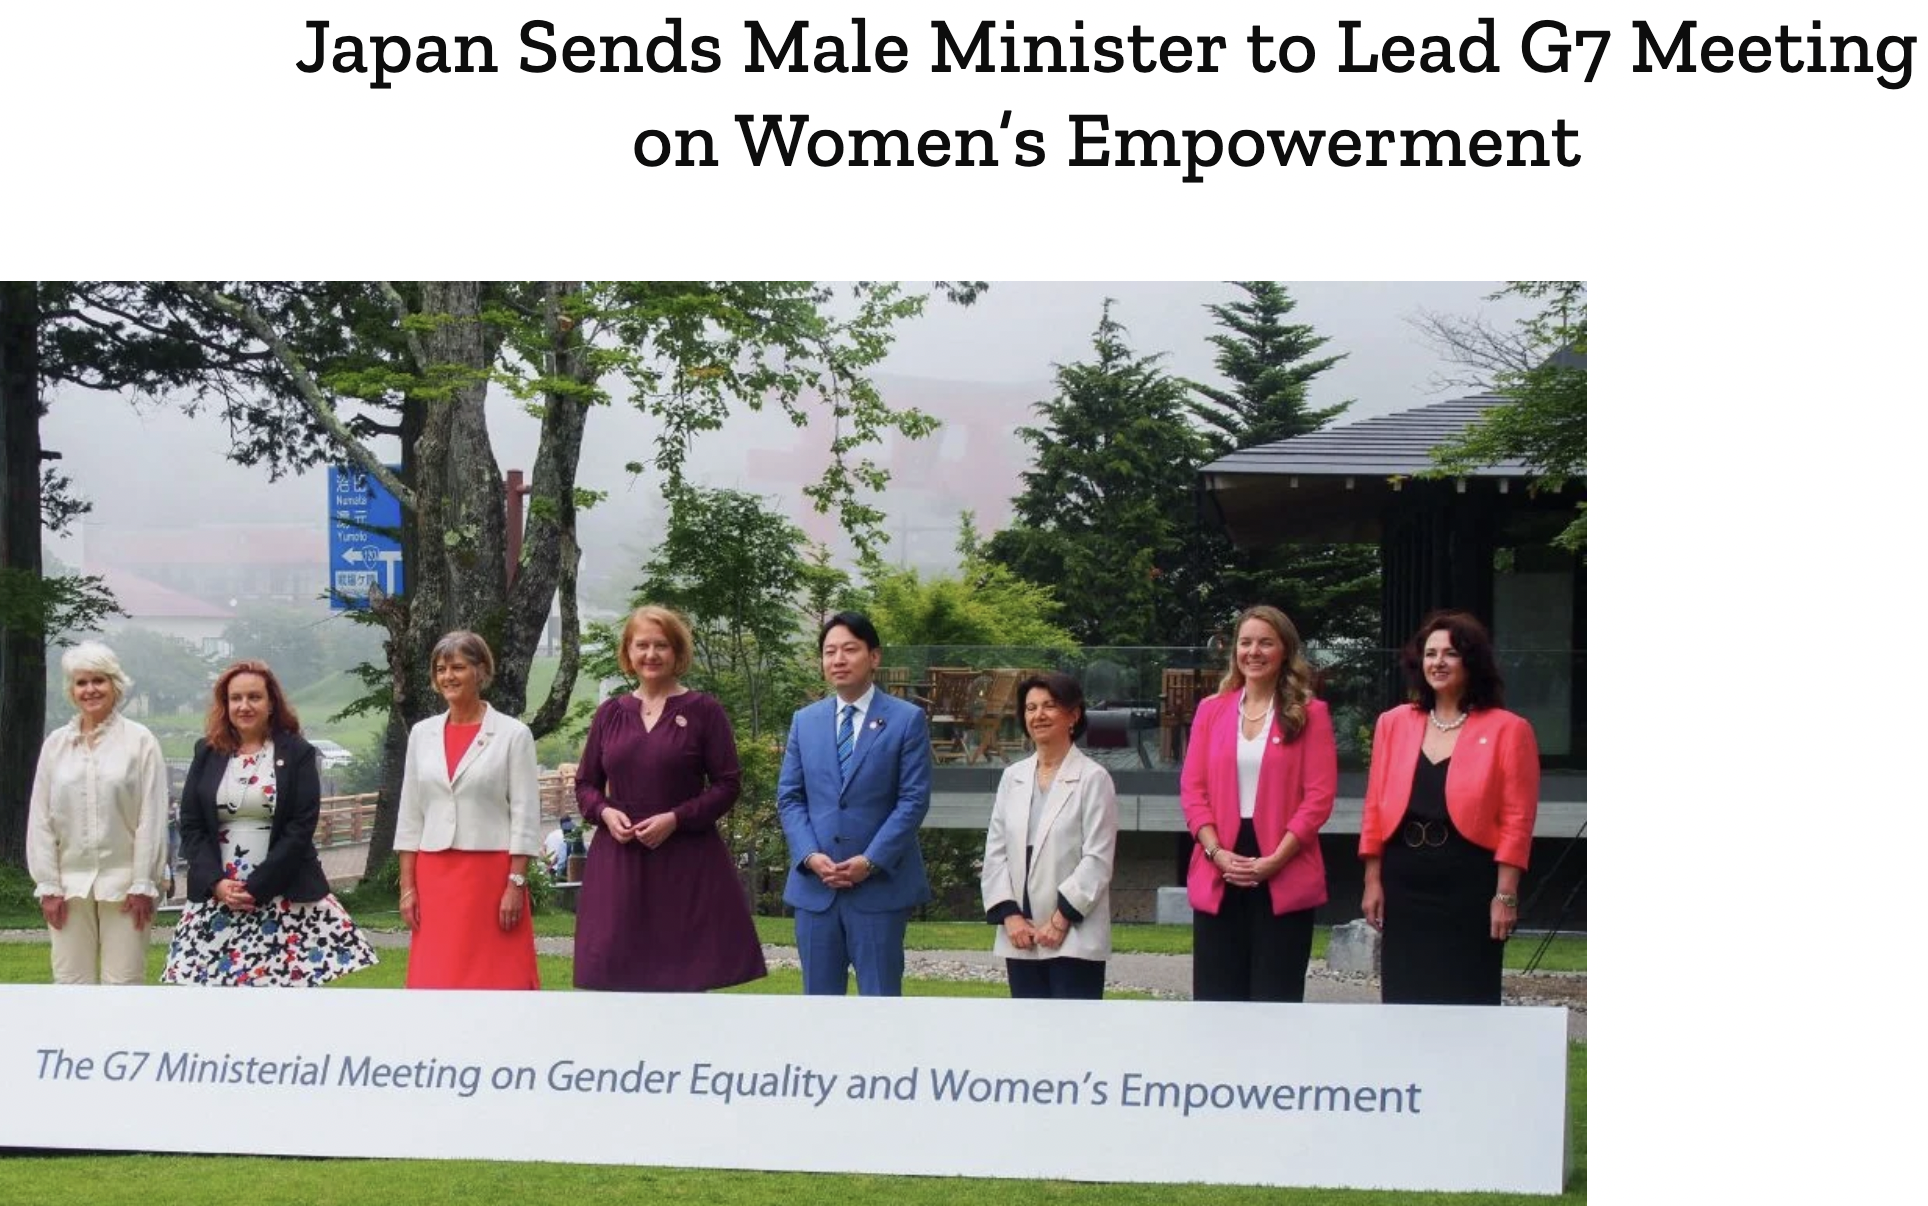 community - Japan Sends Male Minister to Lead G7 Meeting on Women's Empowerment The G7 Ministerial Meeting on Gender Equality and Women's Empowerment